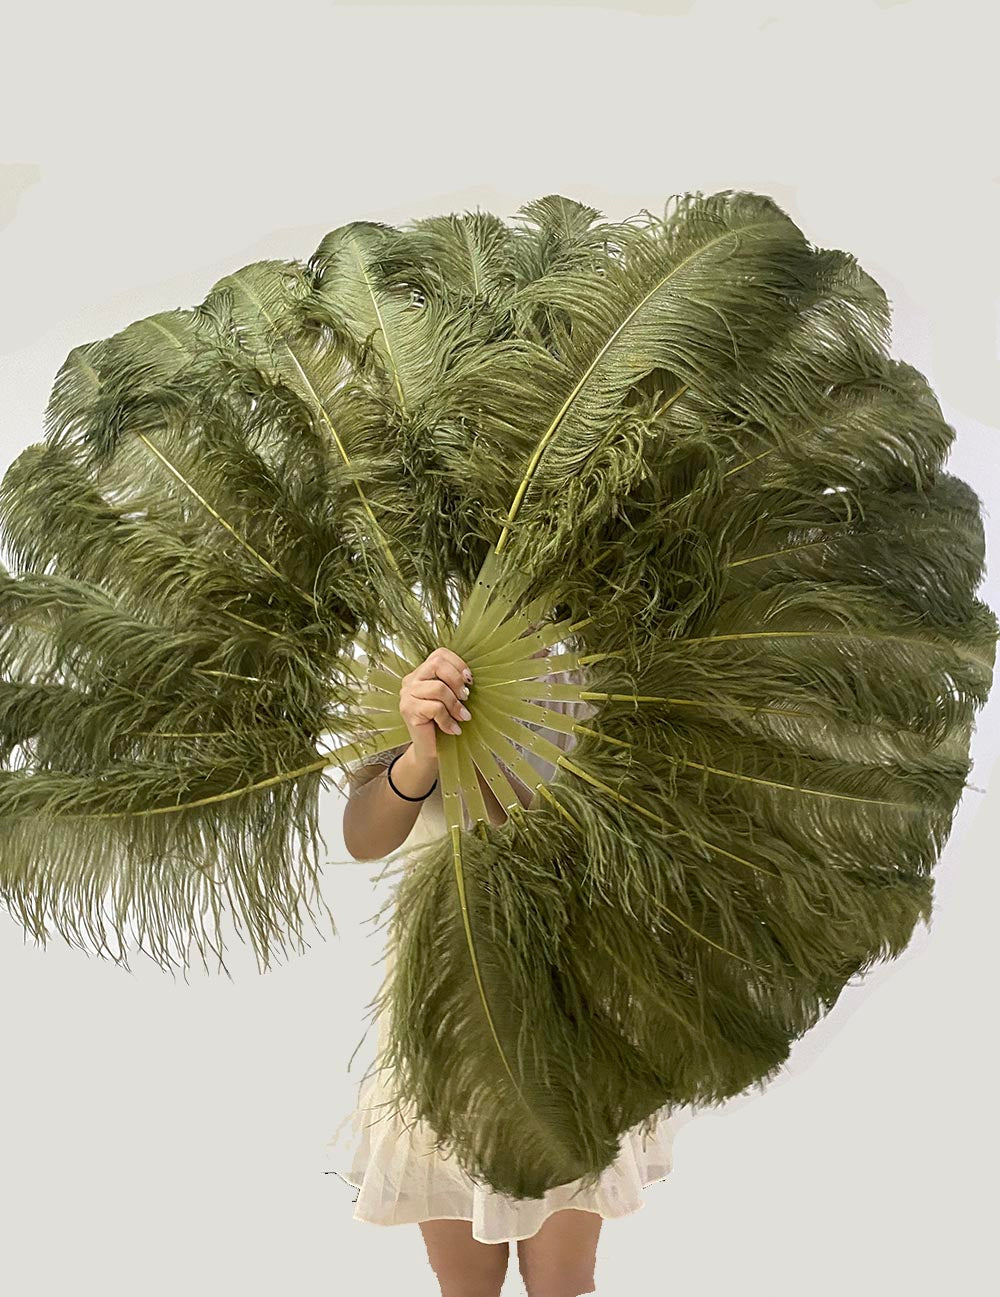 Olive green single layer Ostrich Feather Fan with leather travel Bag 25